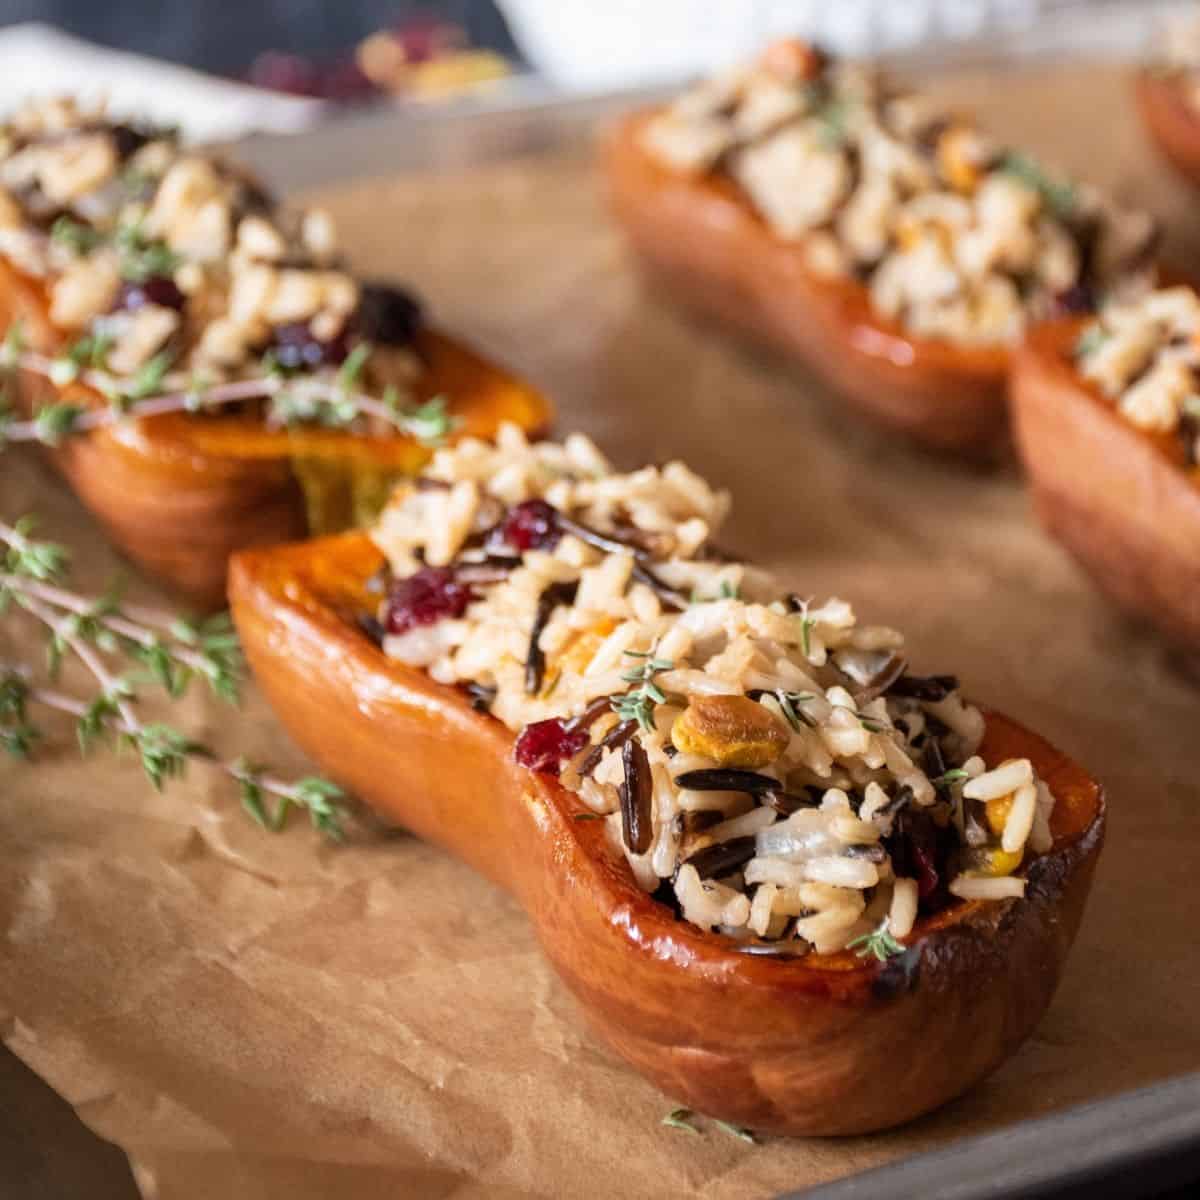 Honeynut Squash Stuffed with Cranberry Wild Rice Pilaf - Being Nutritious